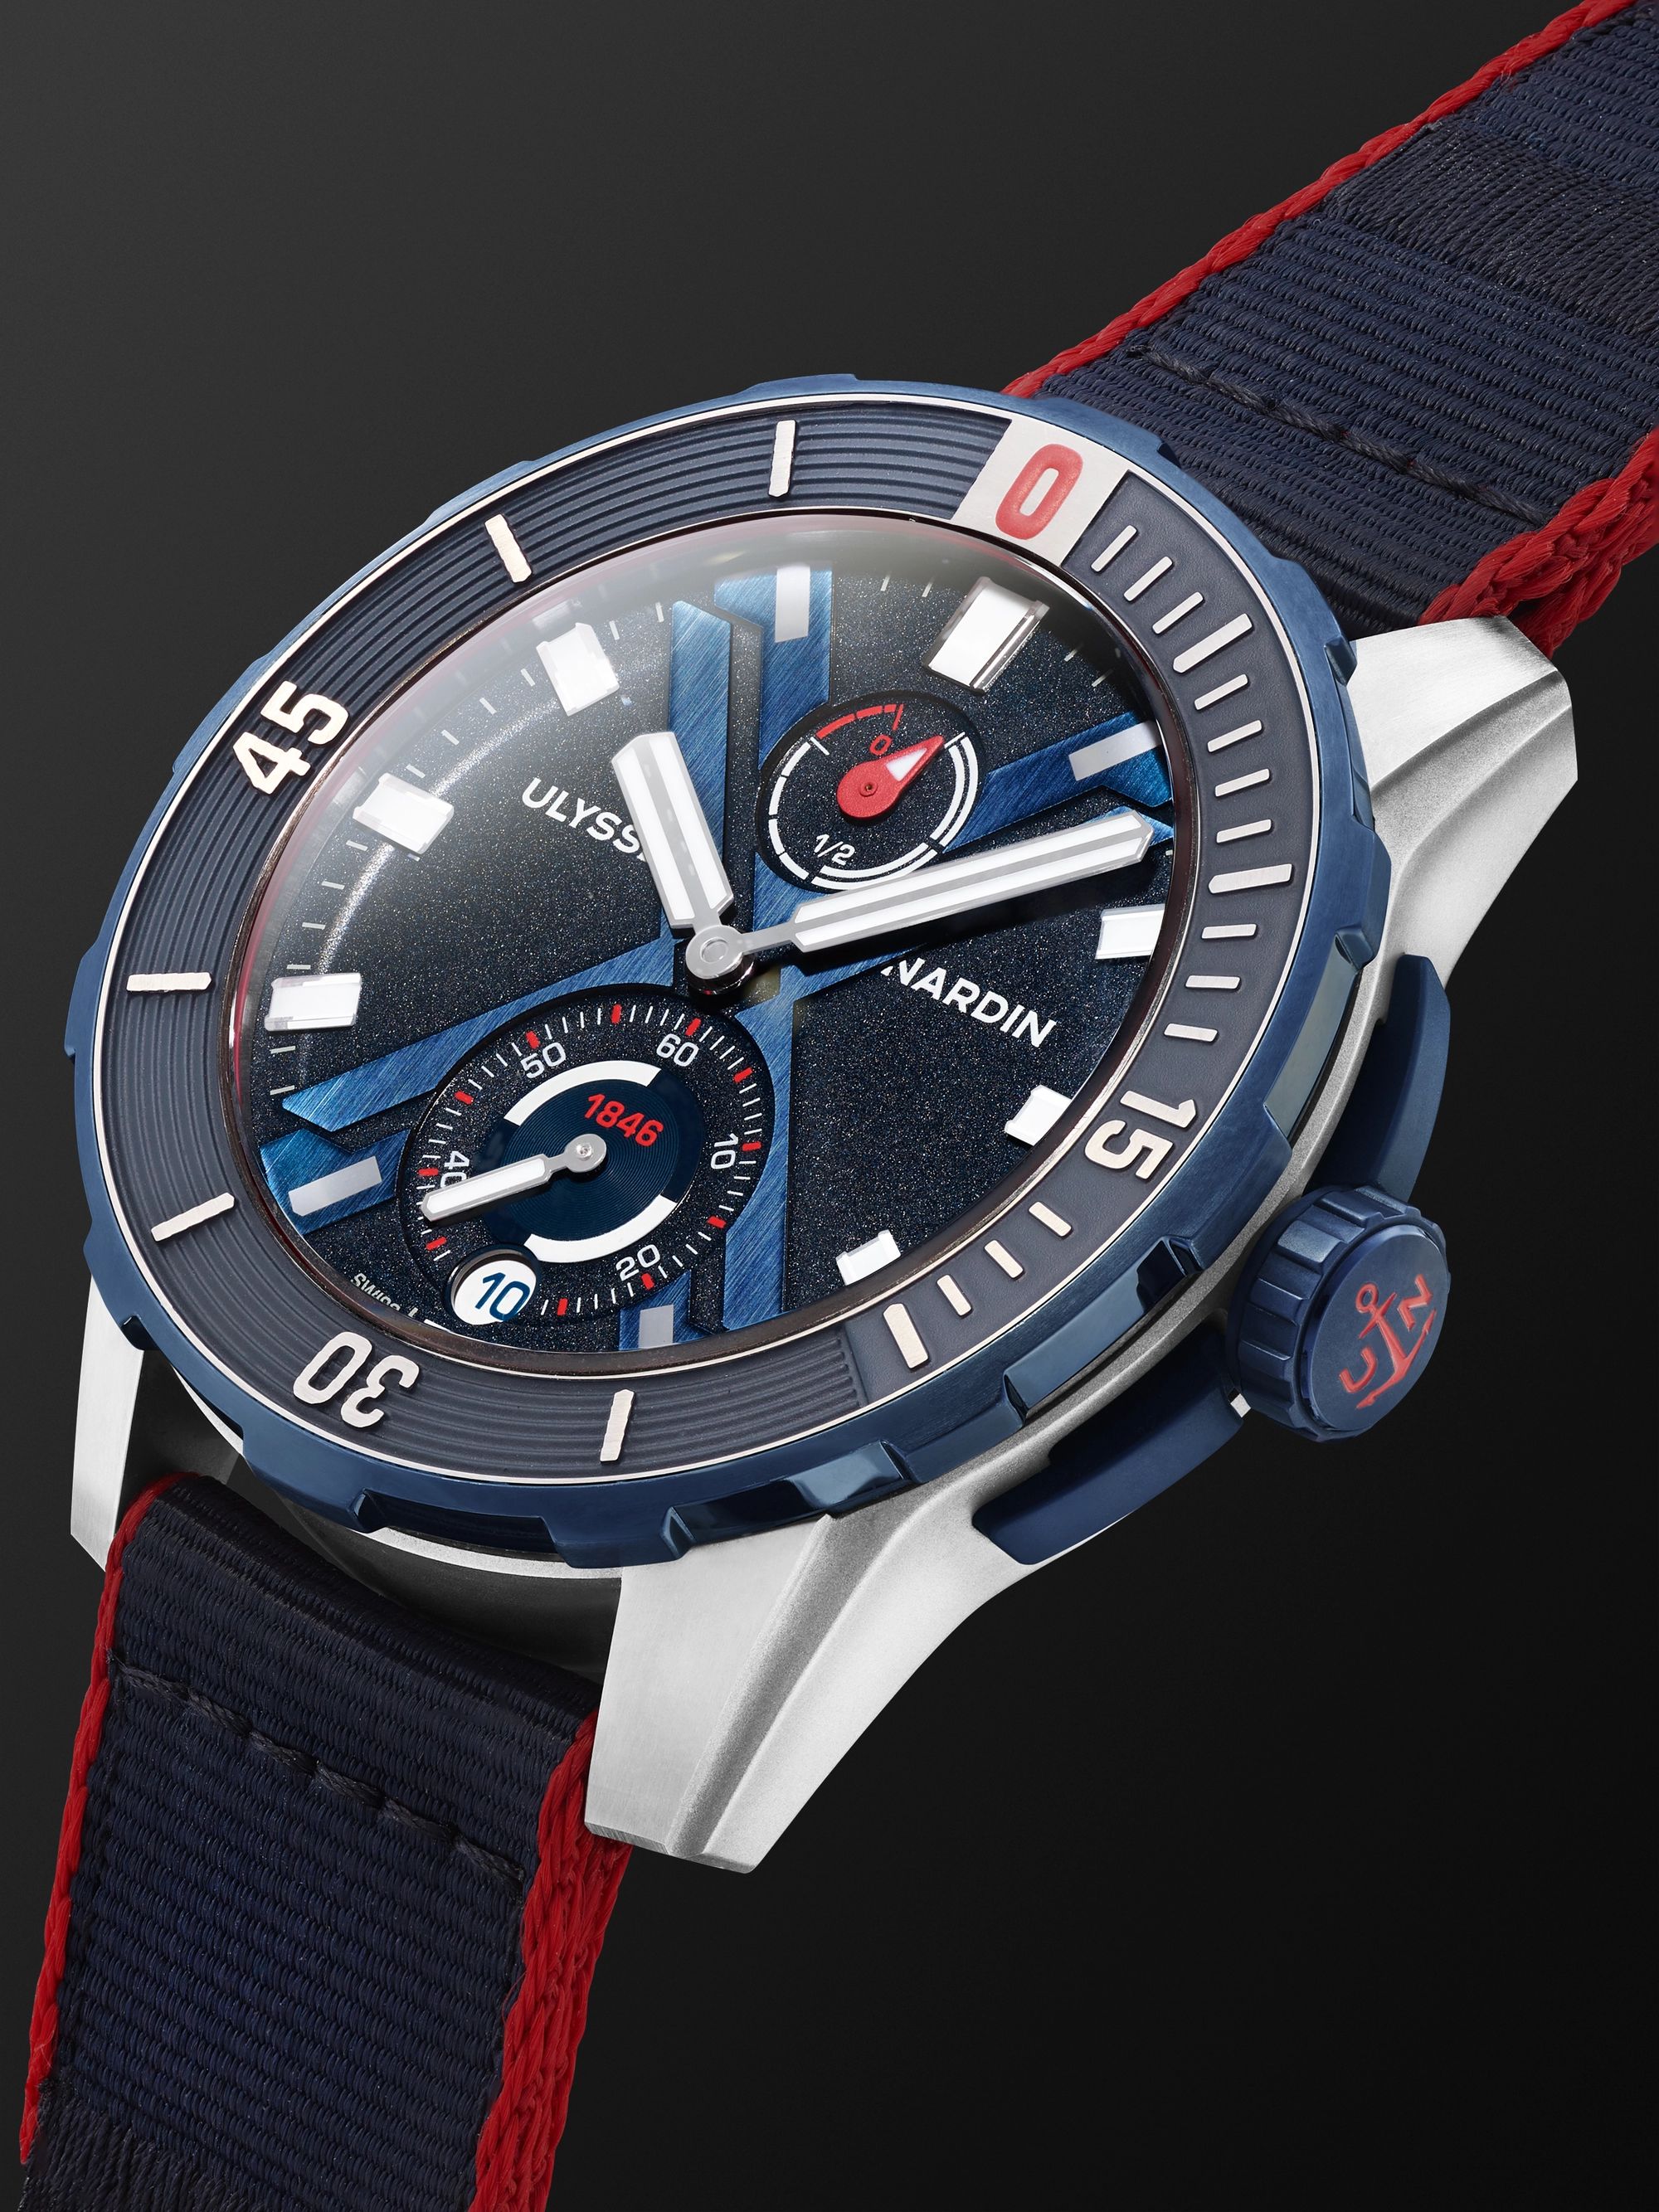 ULYSSE NARDIN Diver X Nemo Point Limited Edition Automatic 44mm Titanium and Webbing Watch, Ref. No. 1183-170LE/93-NEMO